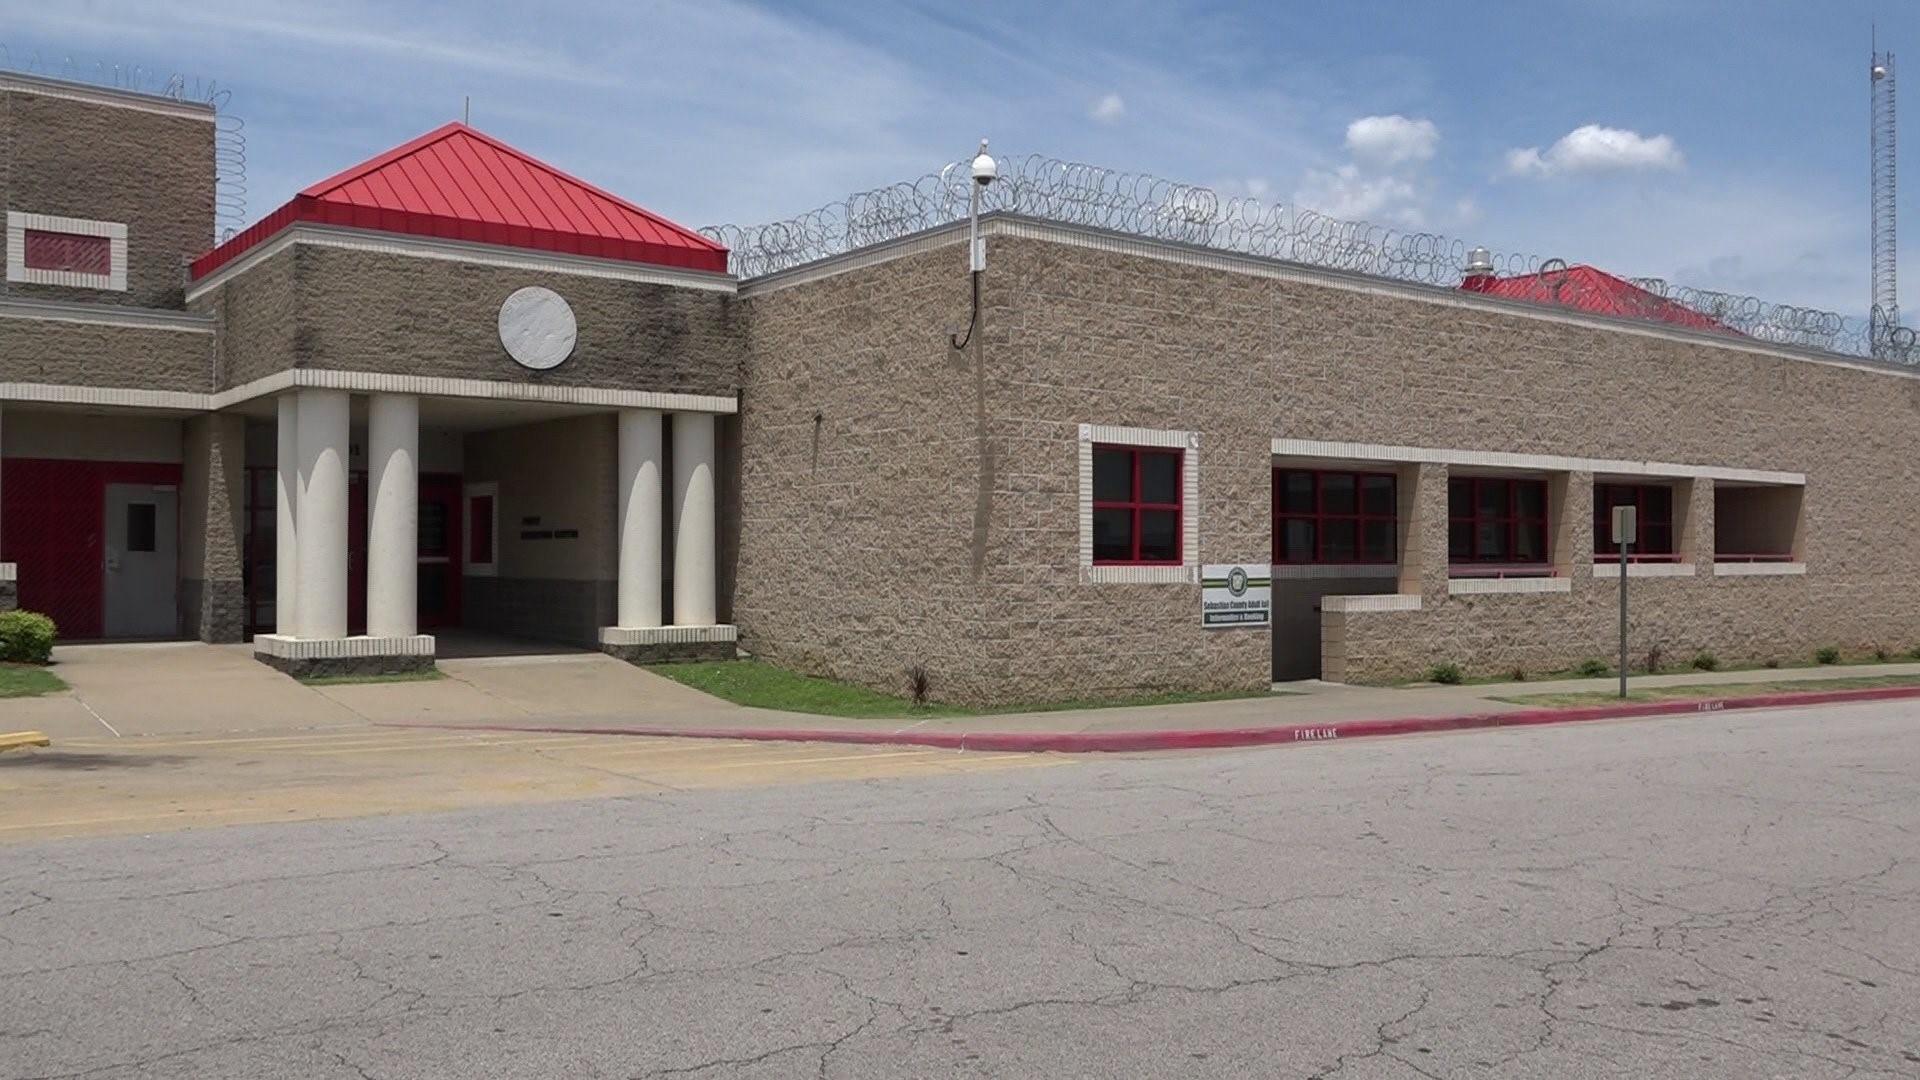 Investigators were reportedly informed by a confidential source stating that deputies were bringing drugs into the detention center.